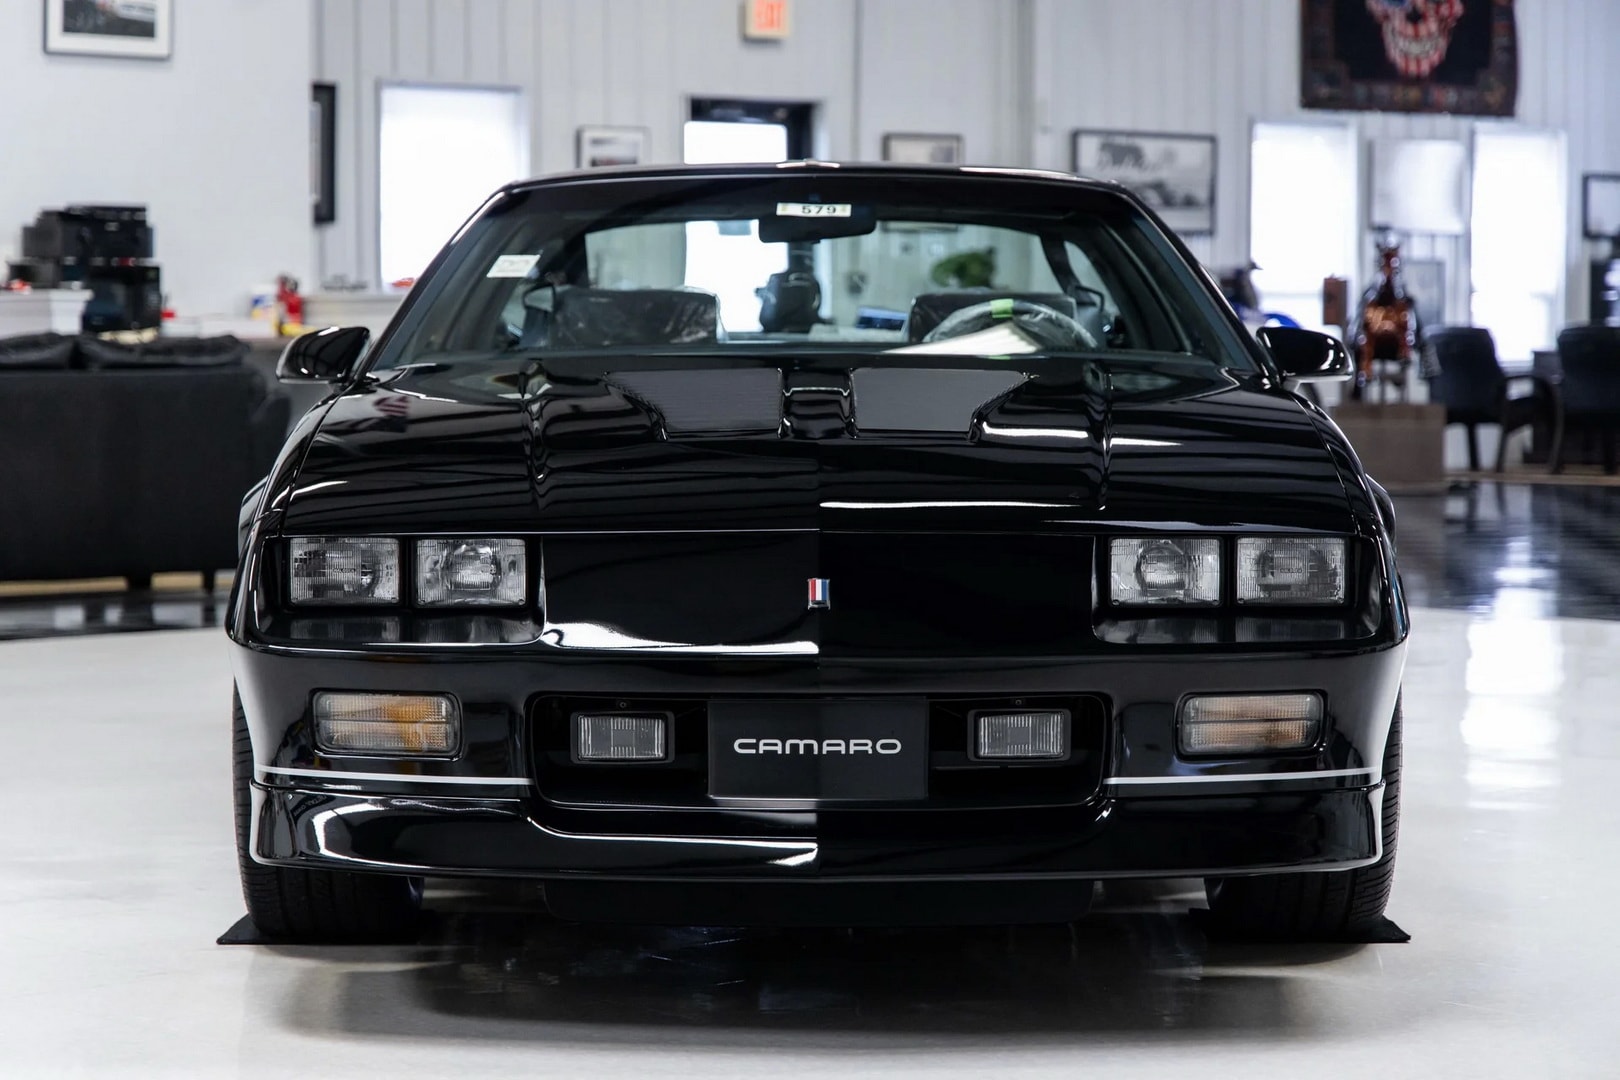 Pristine IROC-Z with 11 Miles on the Clock